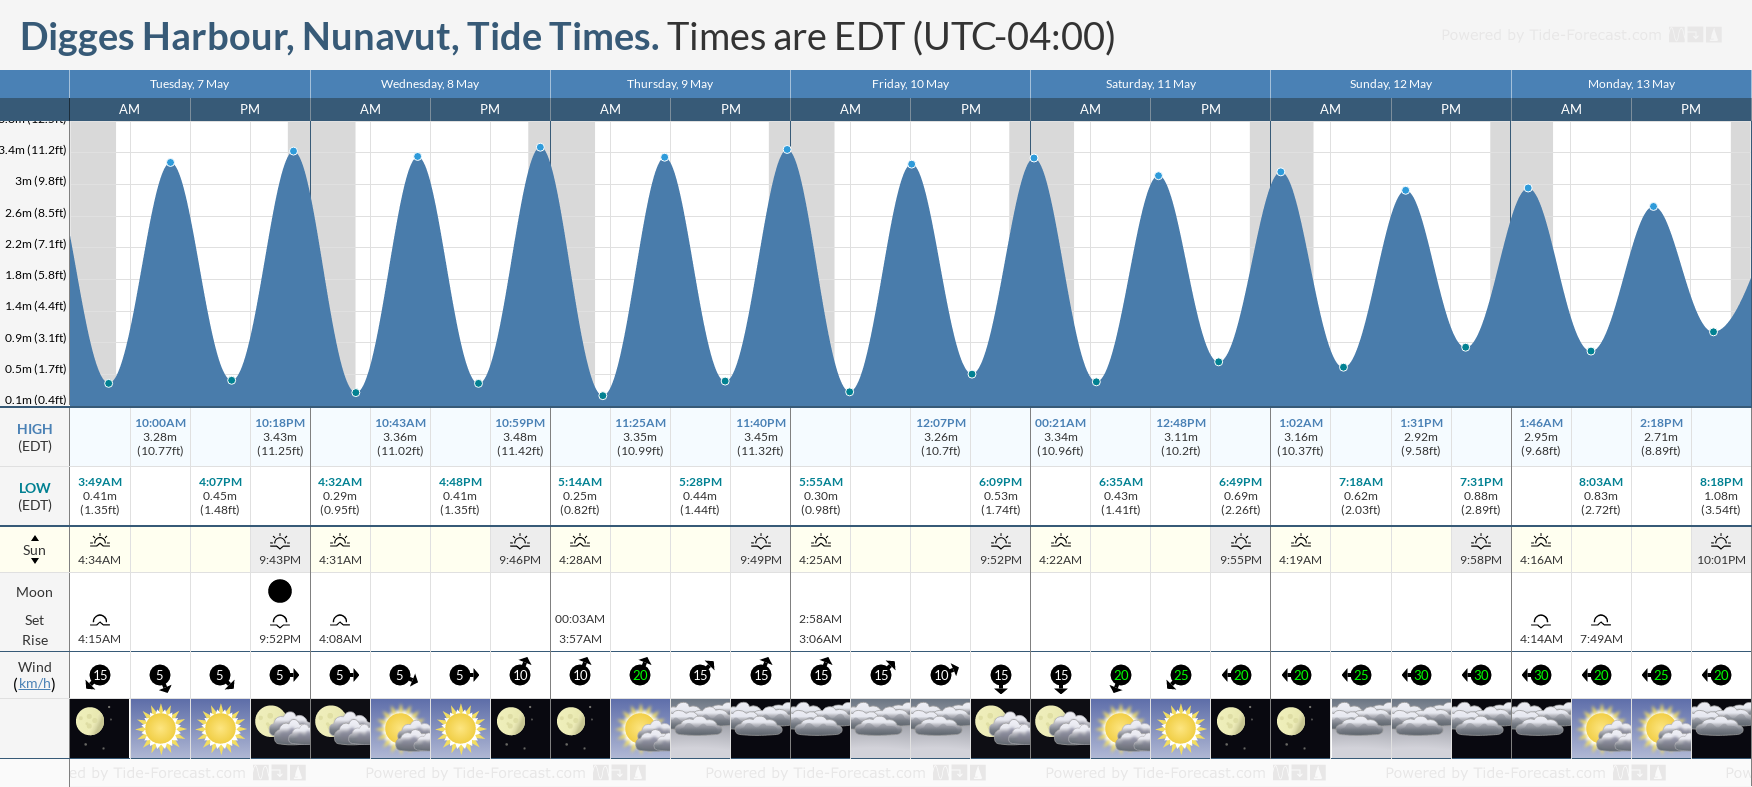 Digges Harbour, Nunavut Tide Chart including high and low tide tide times for the next 7 days